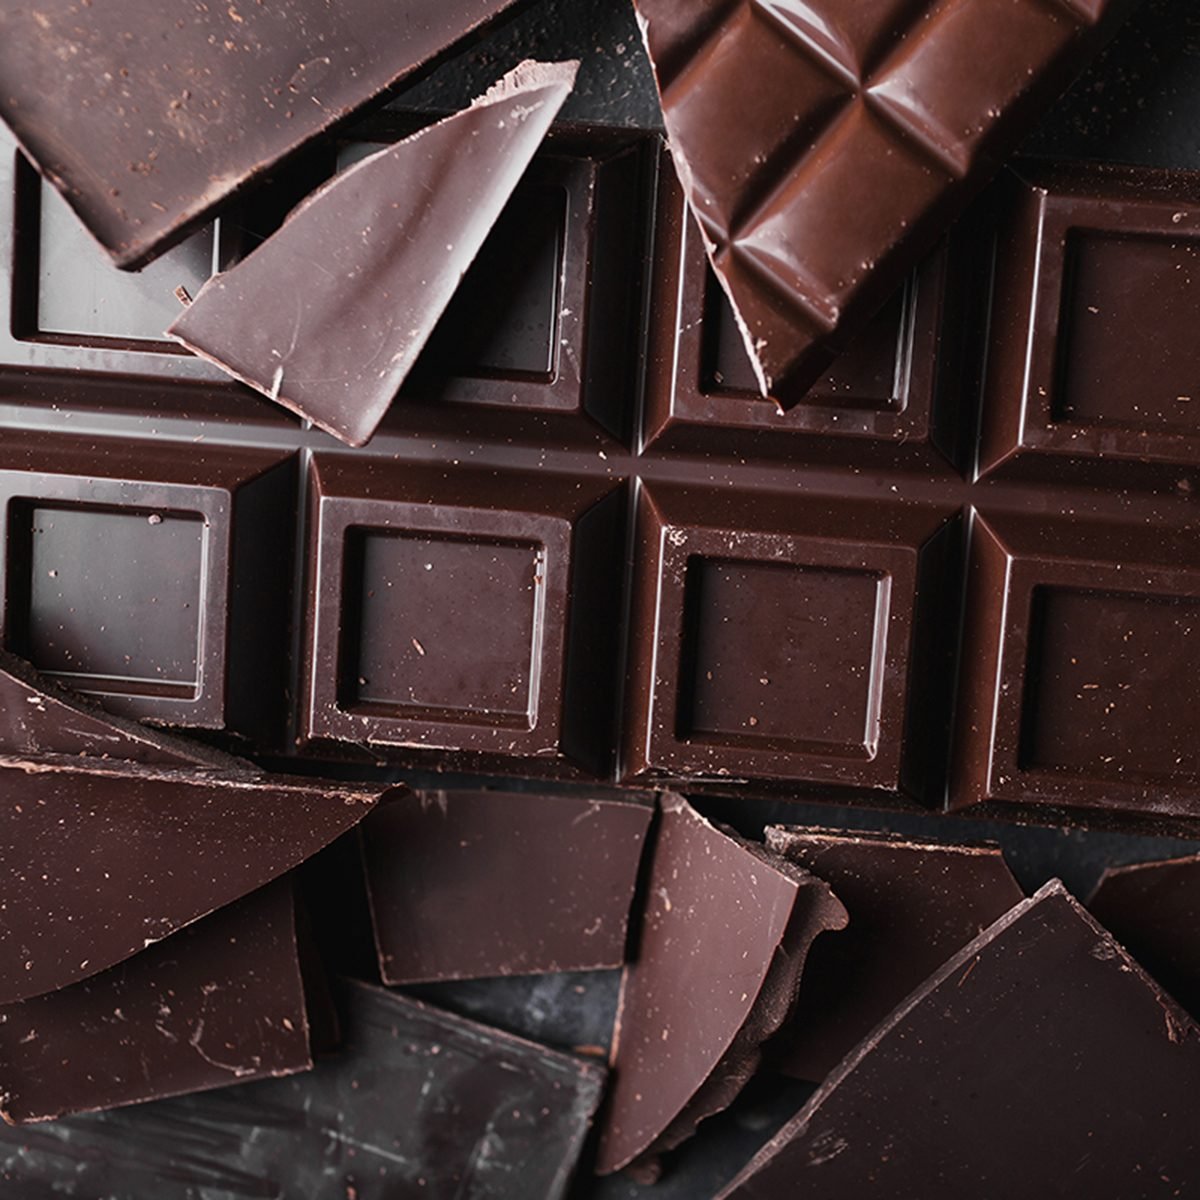 7 Of The Best Vegan Chocolate Bars You Can Buy Online,1964 Silver Half Dollar Value